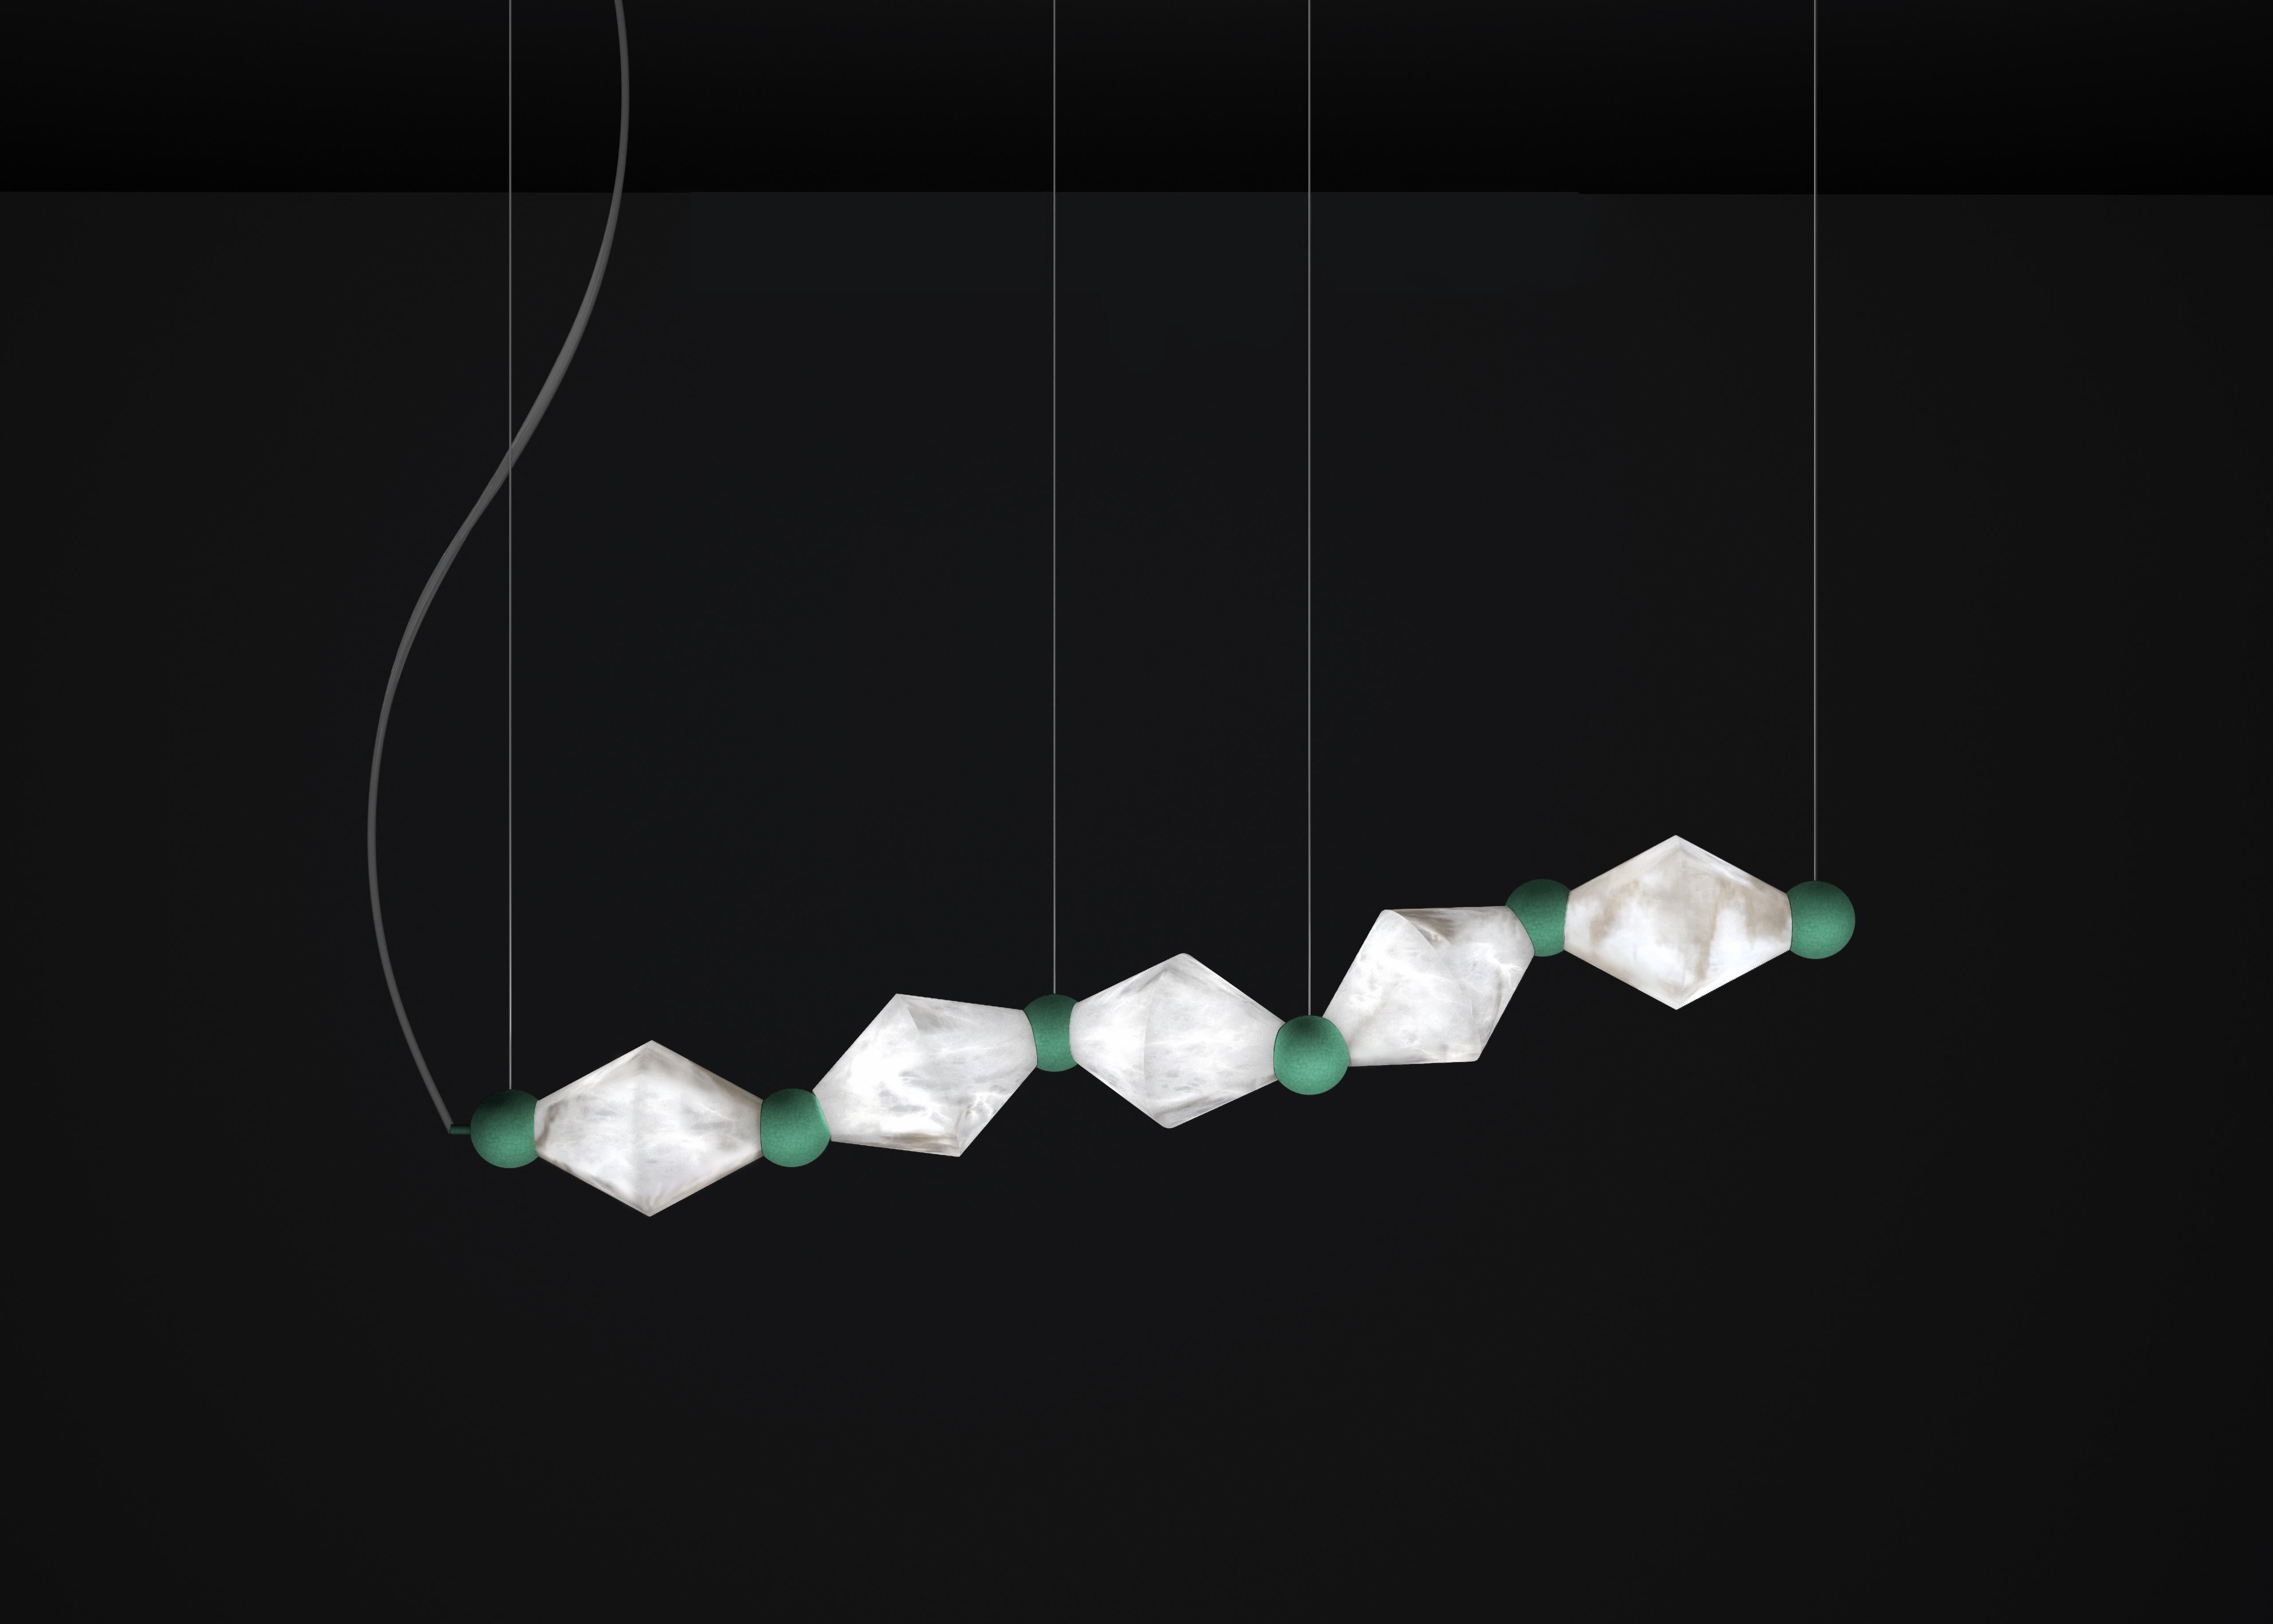 Chronos Freedom Green Metal Pendant Lamp by Alabastro Italiano
Dimensions: D 21 x W 142 x H 31 cm.
Materials: White alabaster and metal.

Available in different finishes: Shiny Silver, Bronze, Brushed Brass, Ruggine of Florence, Brushed Burnished,